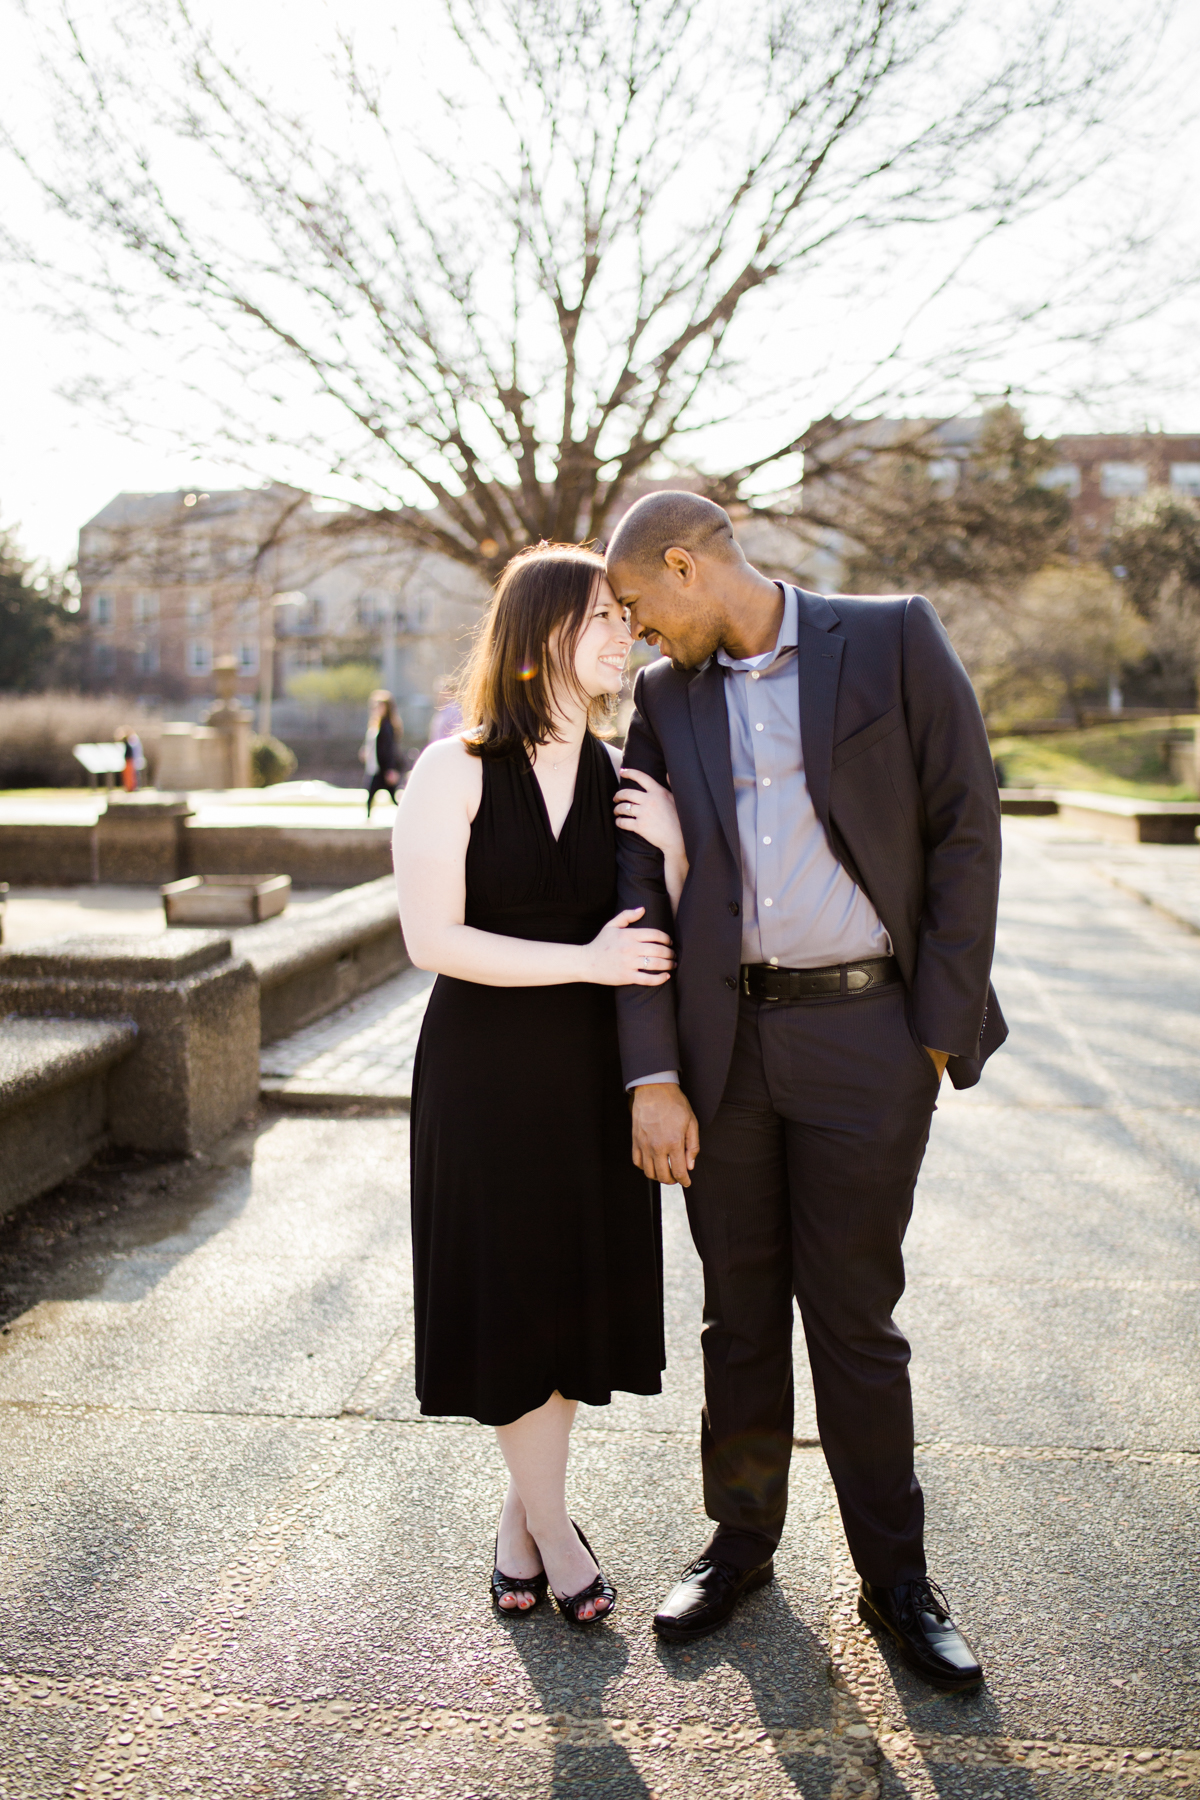 A Scavenger Hunt Proposal | Meridian Hill Park | Washington, DC Engagement | © Carly Arnwine Photography